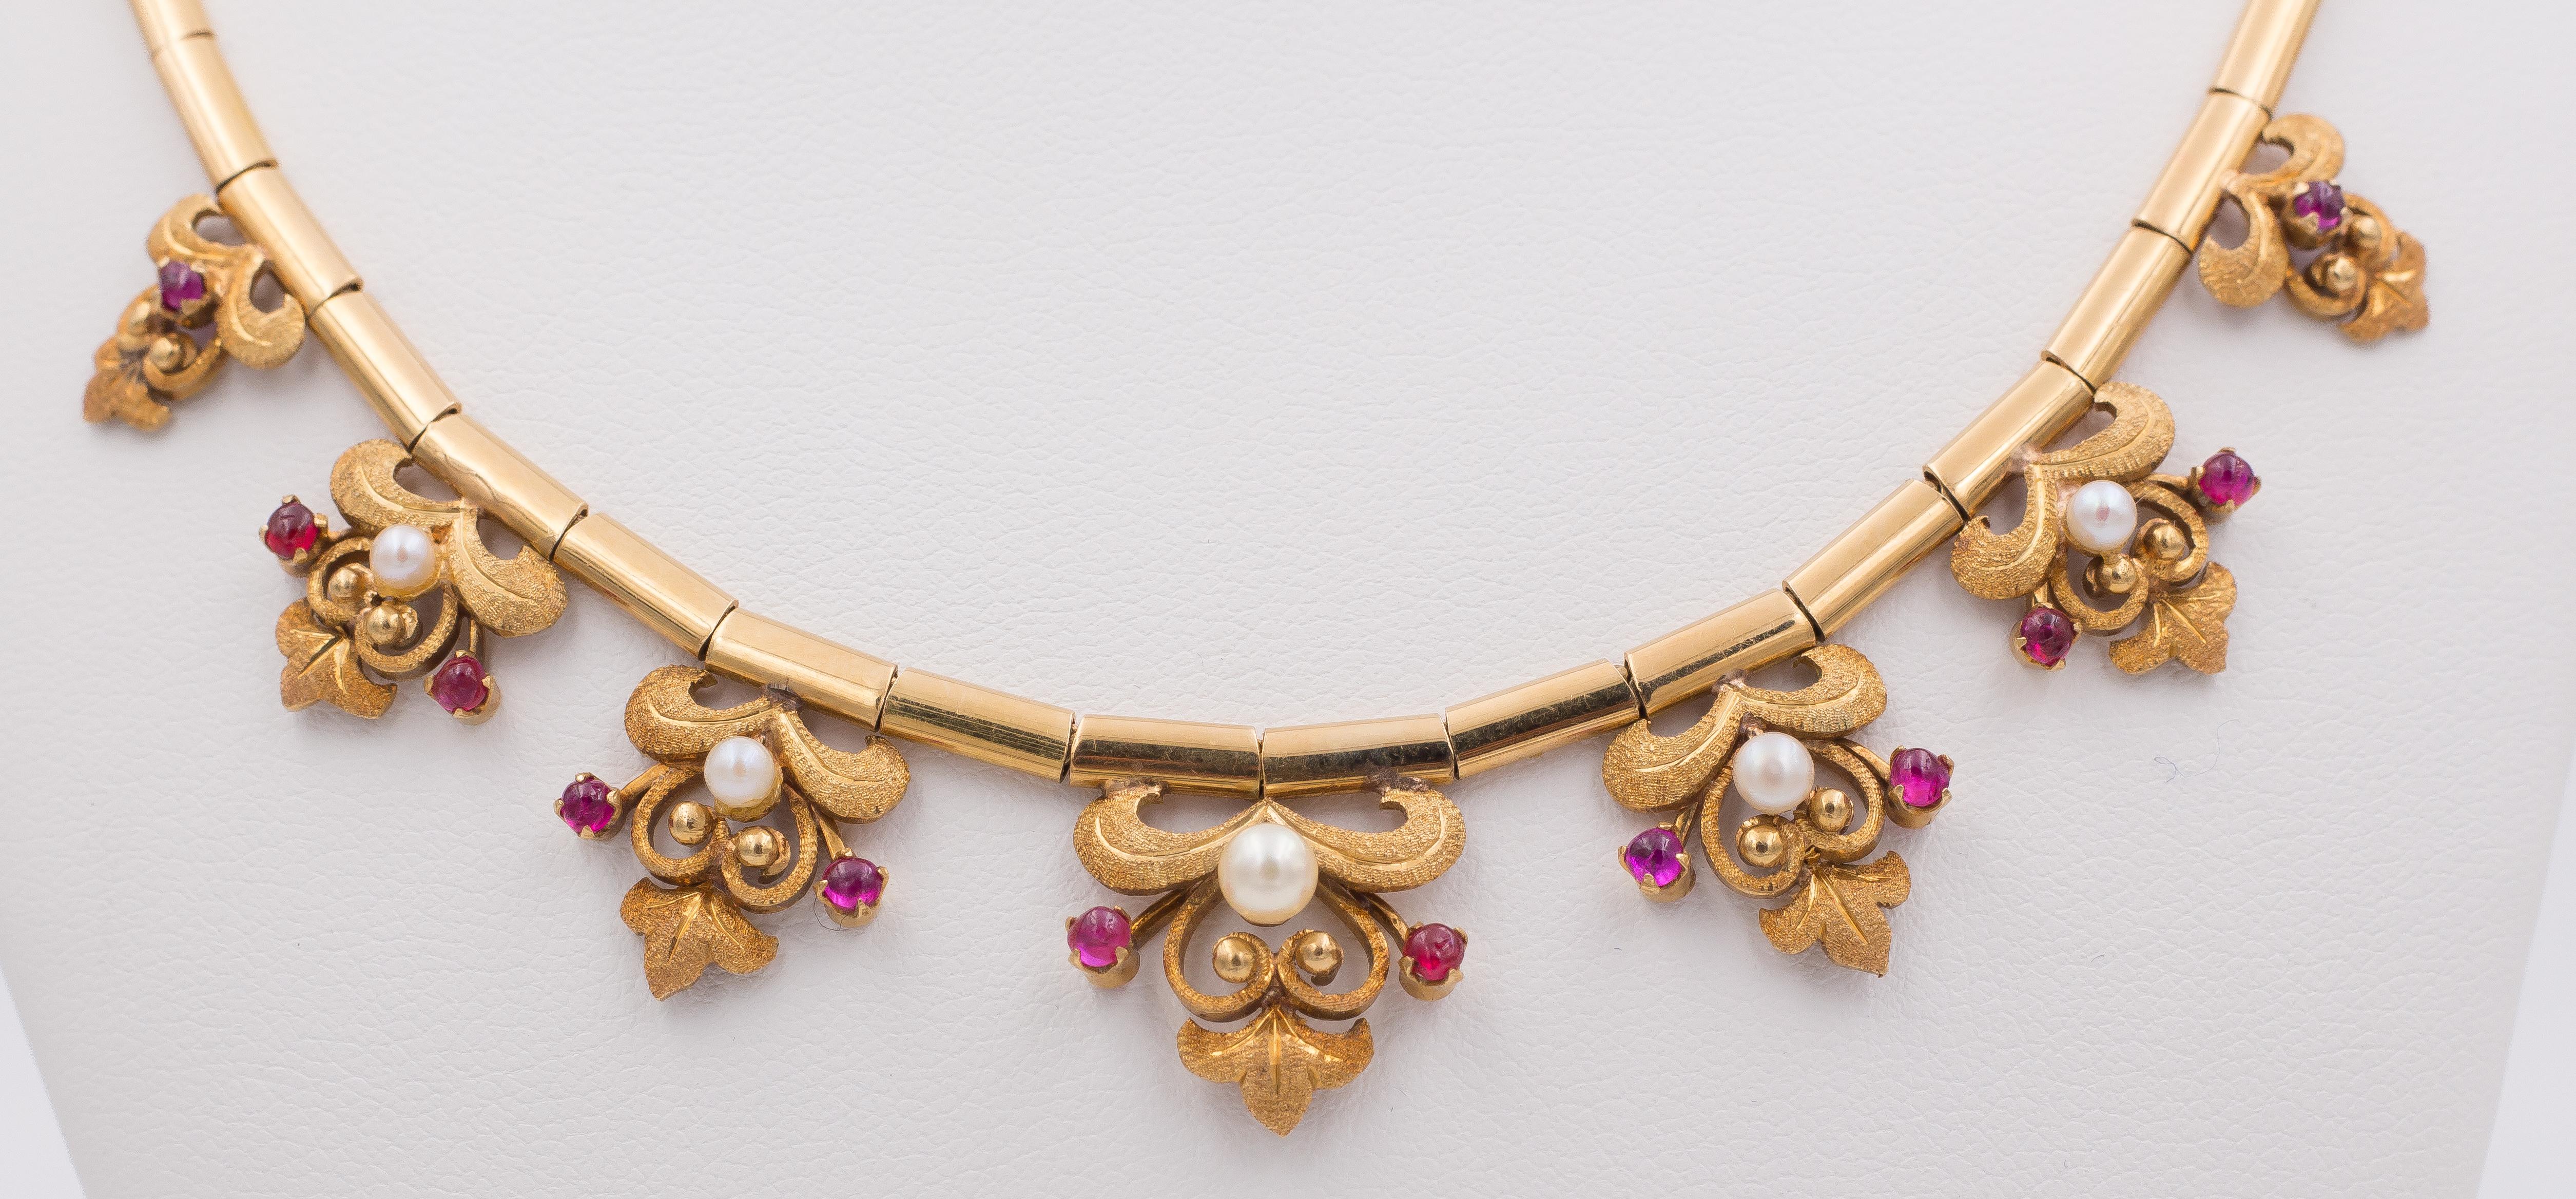 A very elegant vintage necklace: dating from the 1960s, it is set with some beautiful pendant floral and geometrical decorations, ornamented with rubies and white beads. 
The necklace is crafted in 18K gold throughout. 

MATERIALS
18K gold, rubies